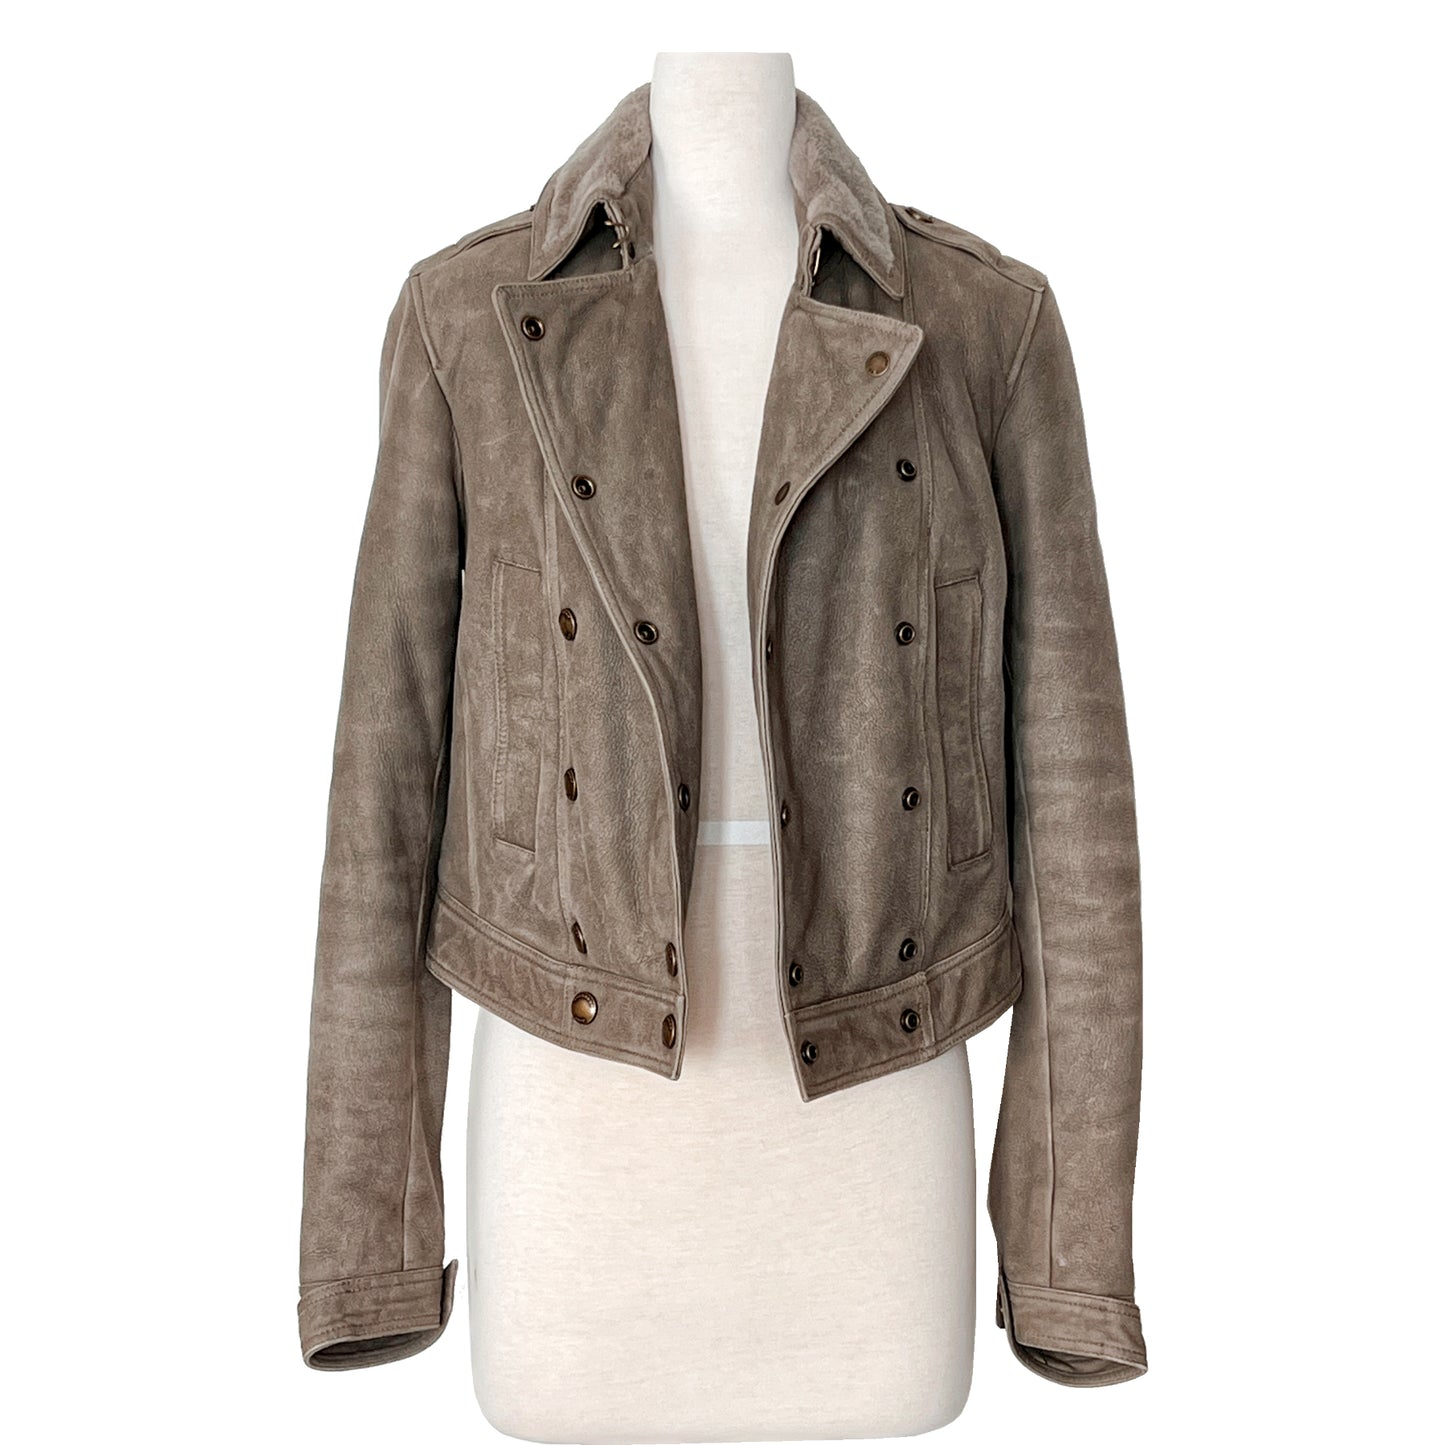 Burberry Brit Jacket 100% Lamb Suede Shearling Double Breasted Coat Jacket